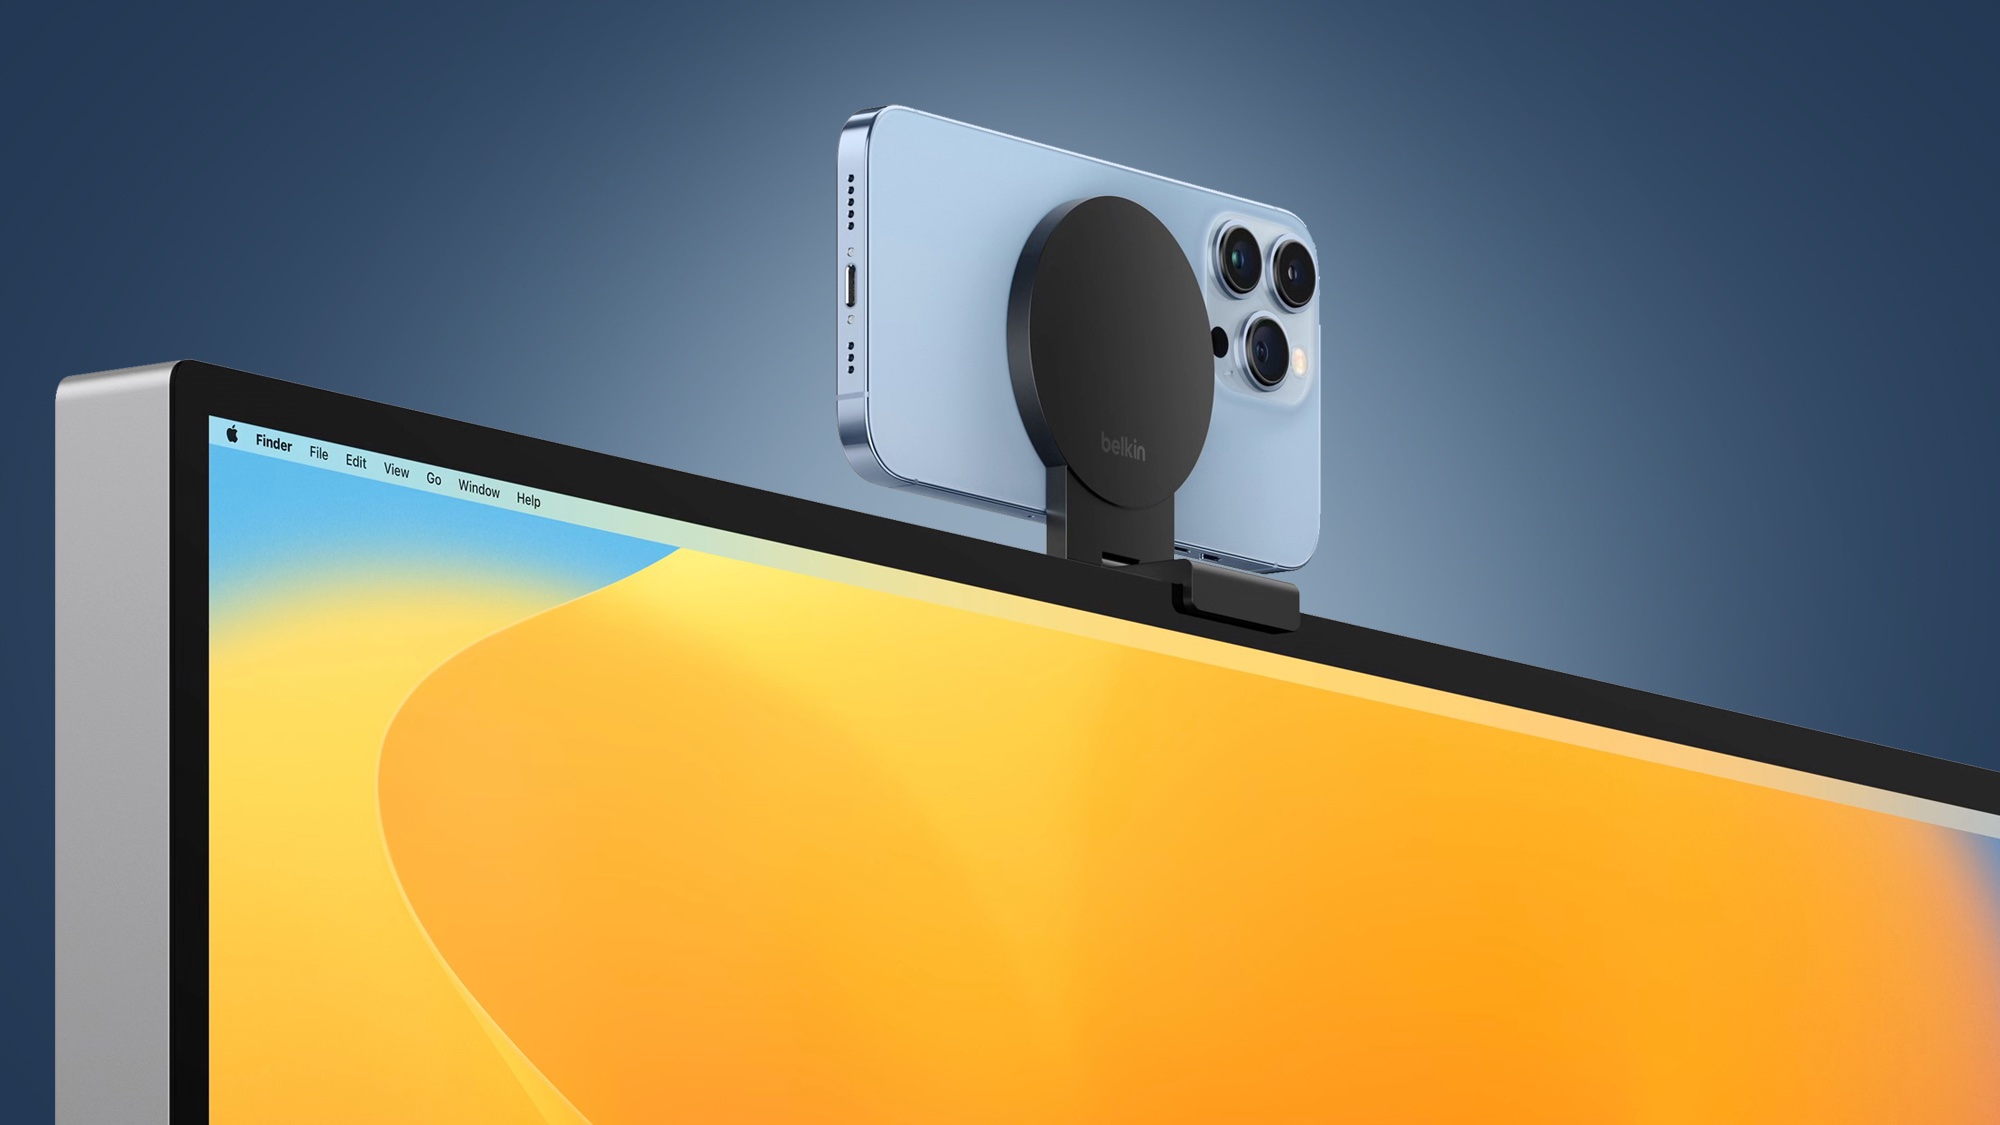 Belkin's iPhone-as-a-Mac-webcam accessory is now available